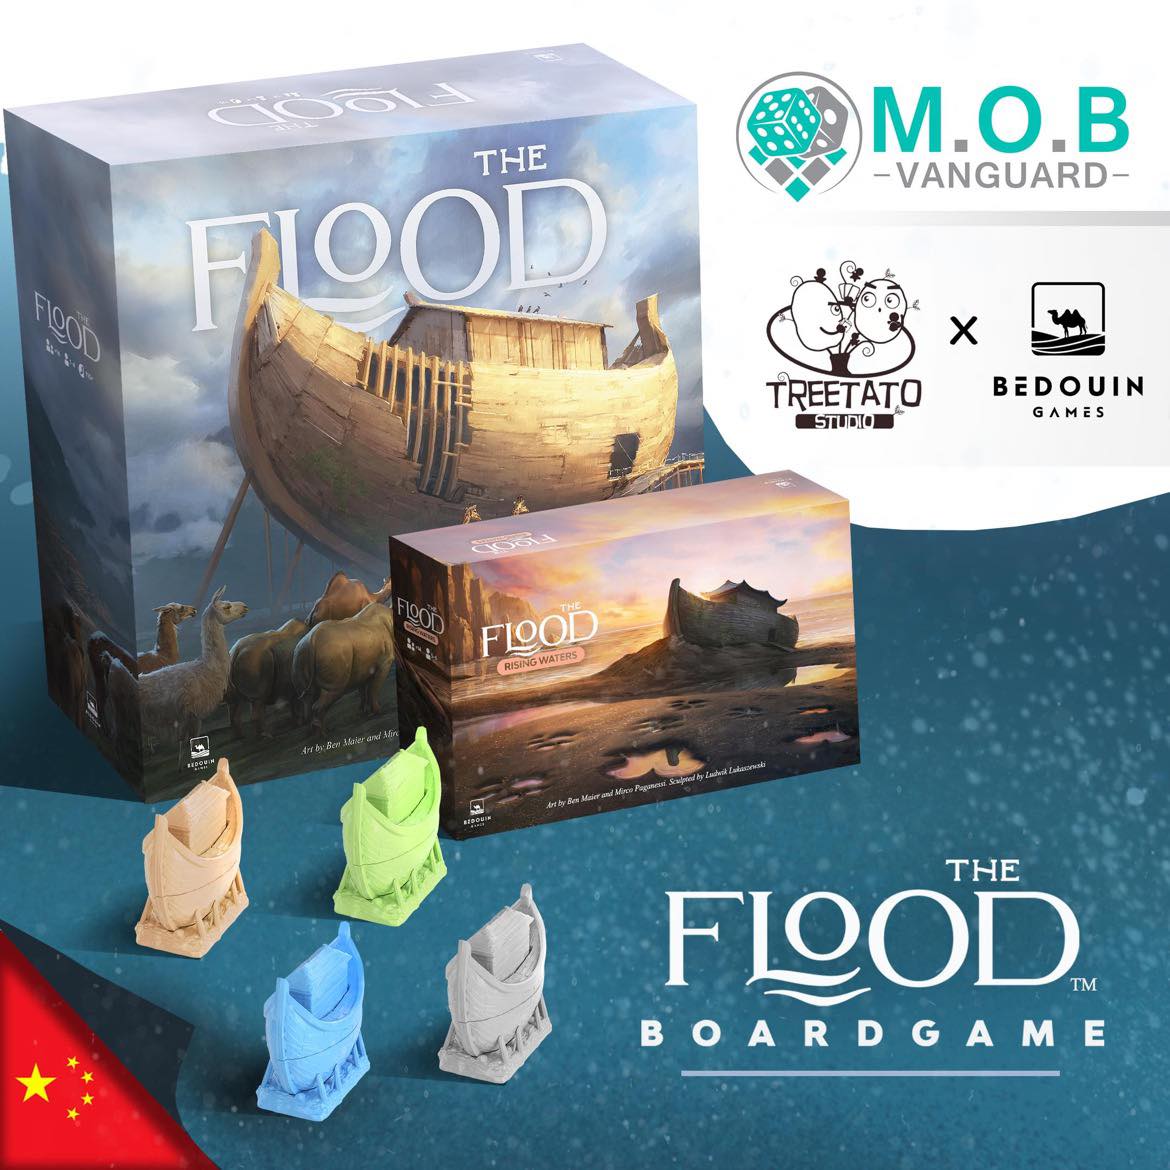 Chinese gamers have a great challenge ahead, as they will be trying to handle The Flood!

The stunning high-stakes resource management Bedouin Games title will be published in Chinese by Treetato Studio & we couldn't be prouder!

#proudagent #licensing #TogetherWeSail #boardgames